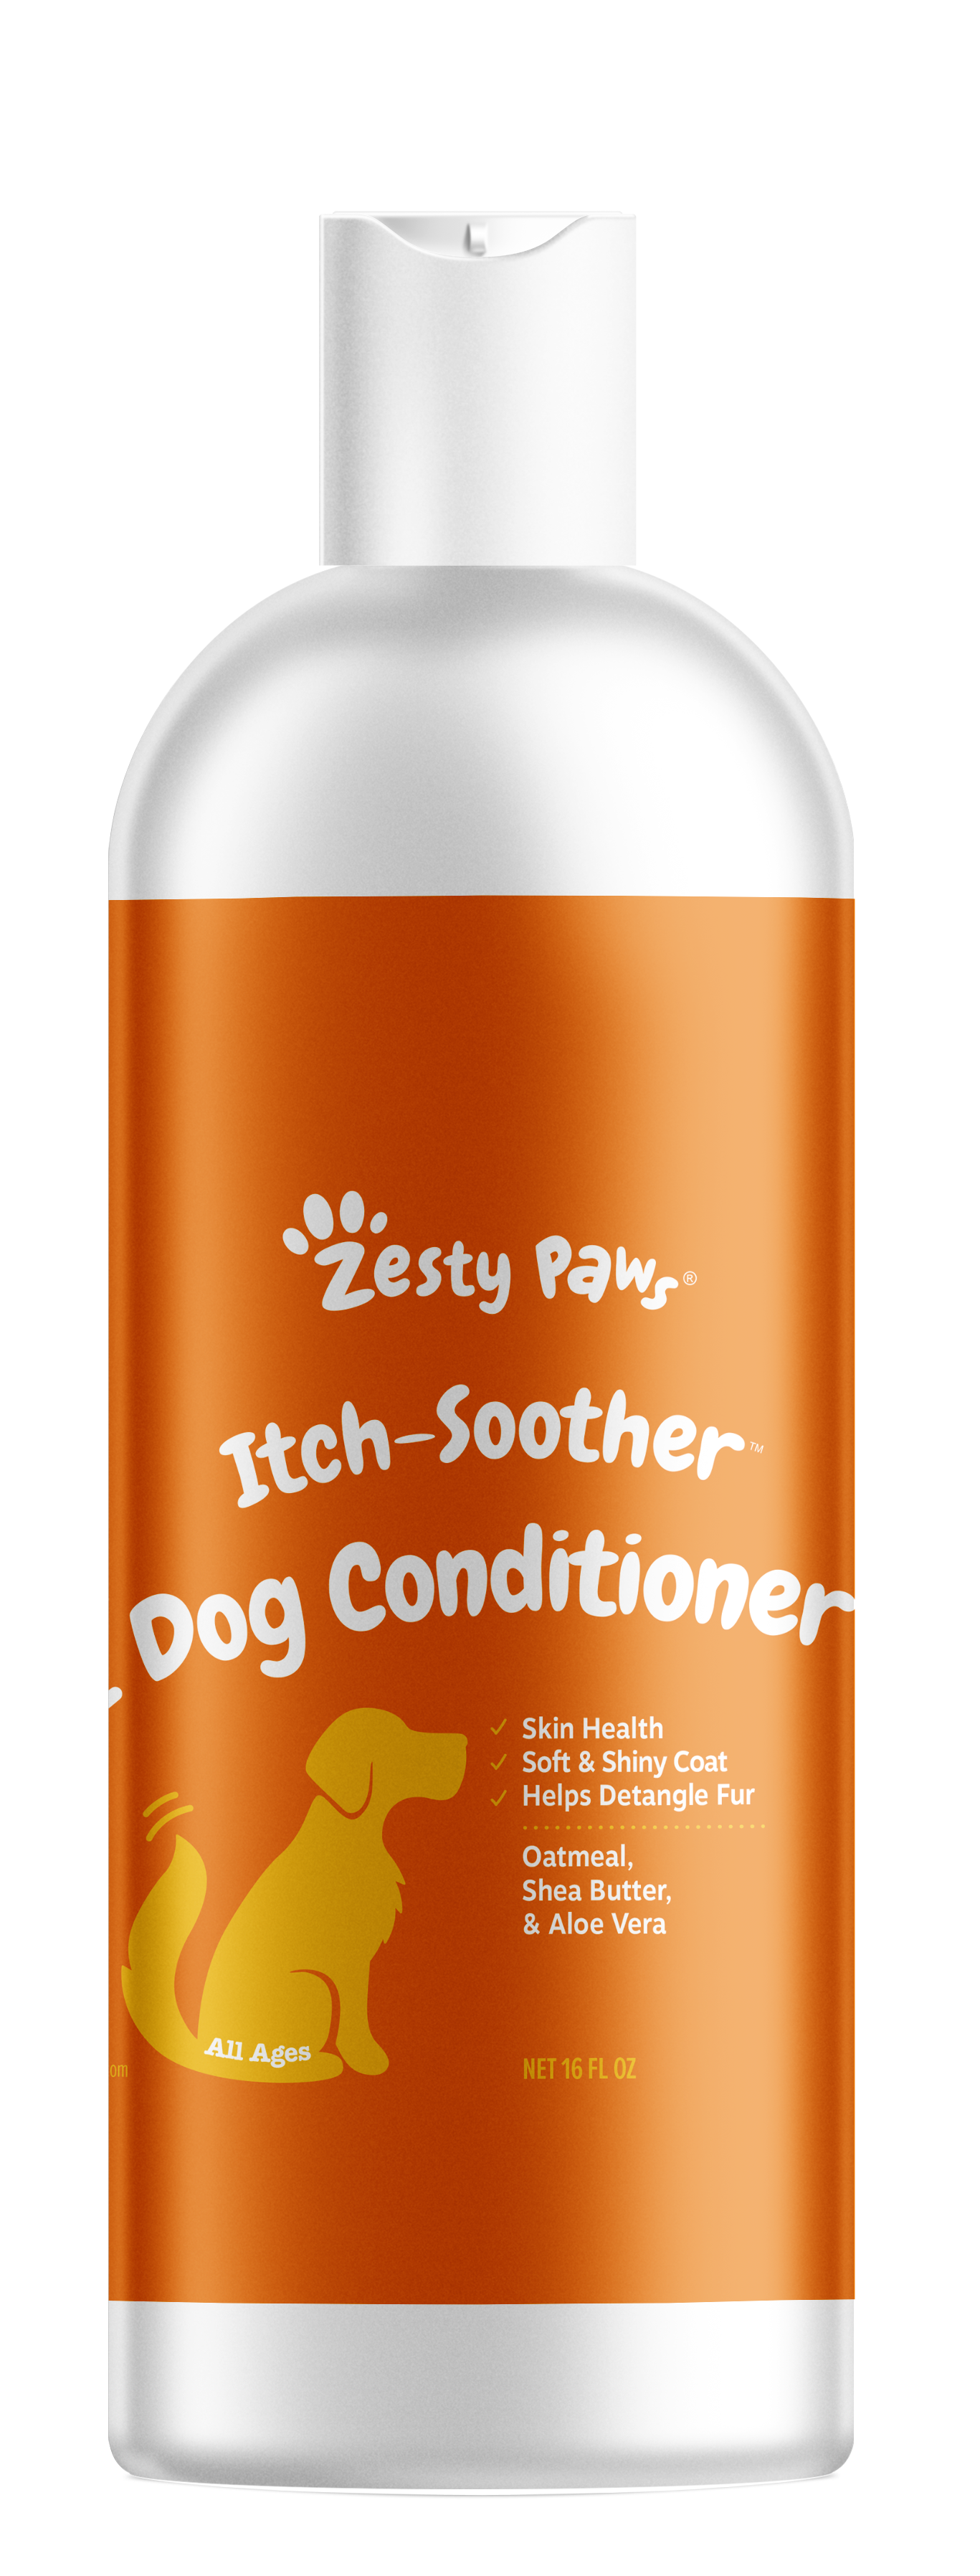 Itch-Soother Conditioner for Dogs